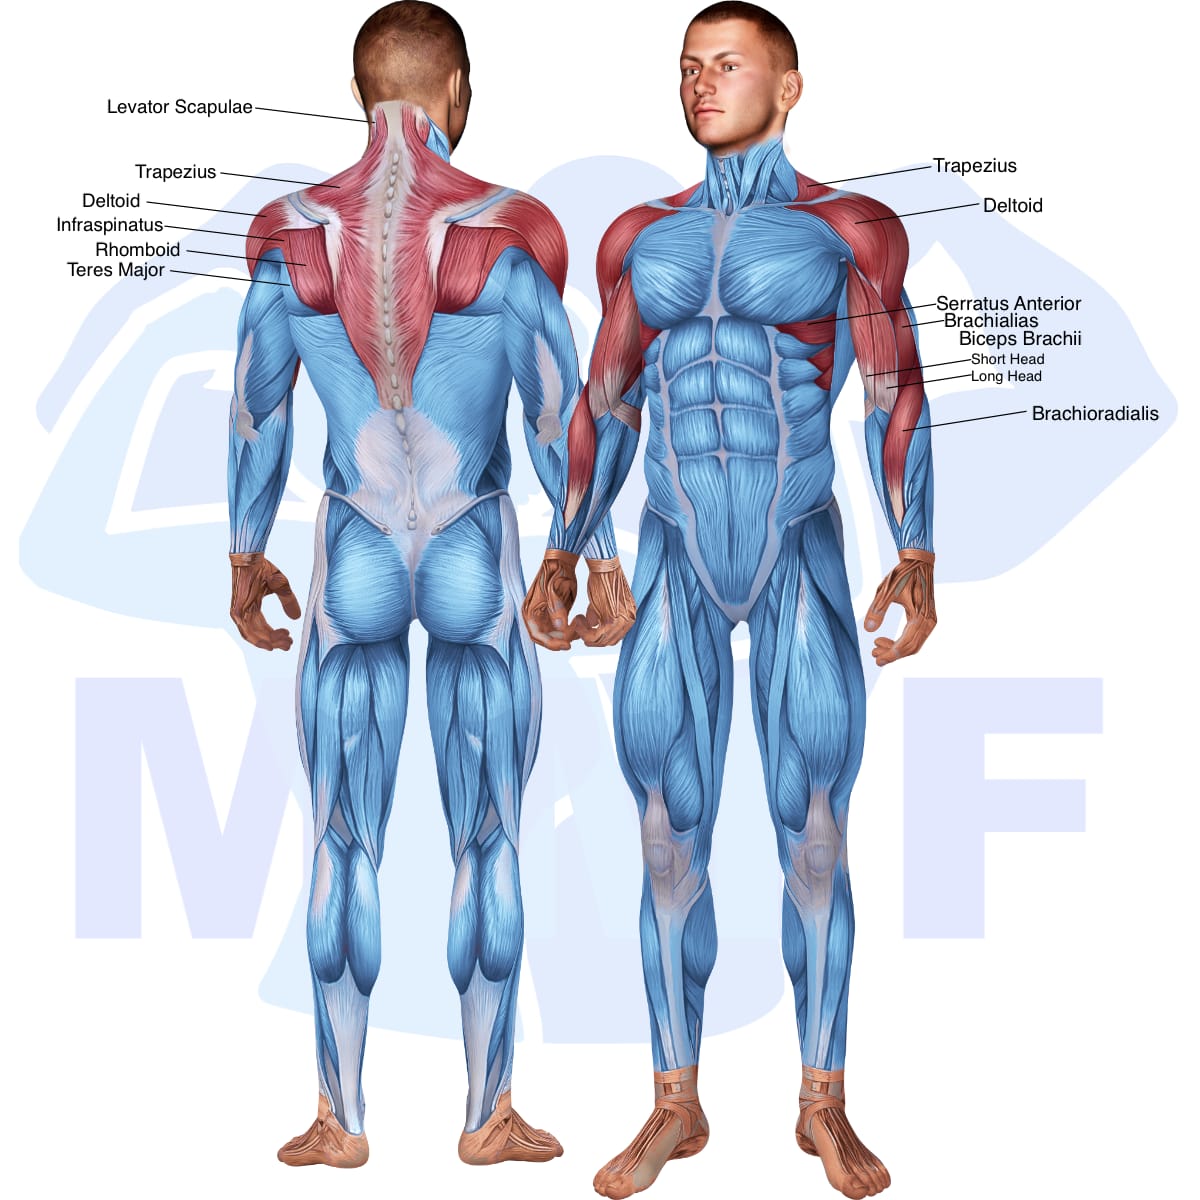 Image of the skeletal muscular system with the muscles used in the barbell standing upright row exercise highlighted in red and the rest in blue.